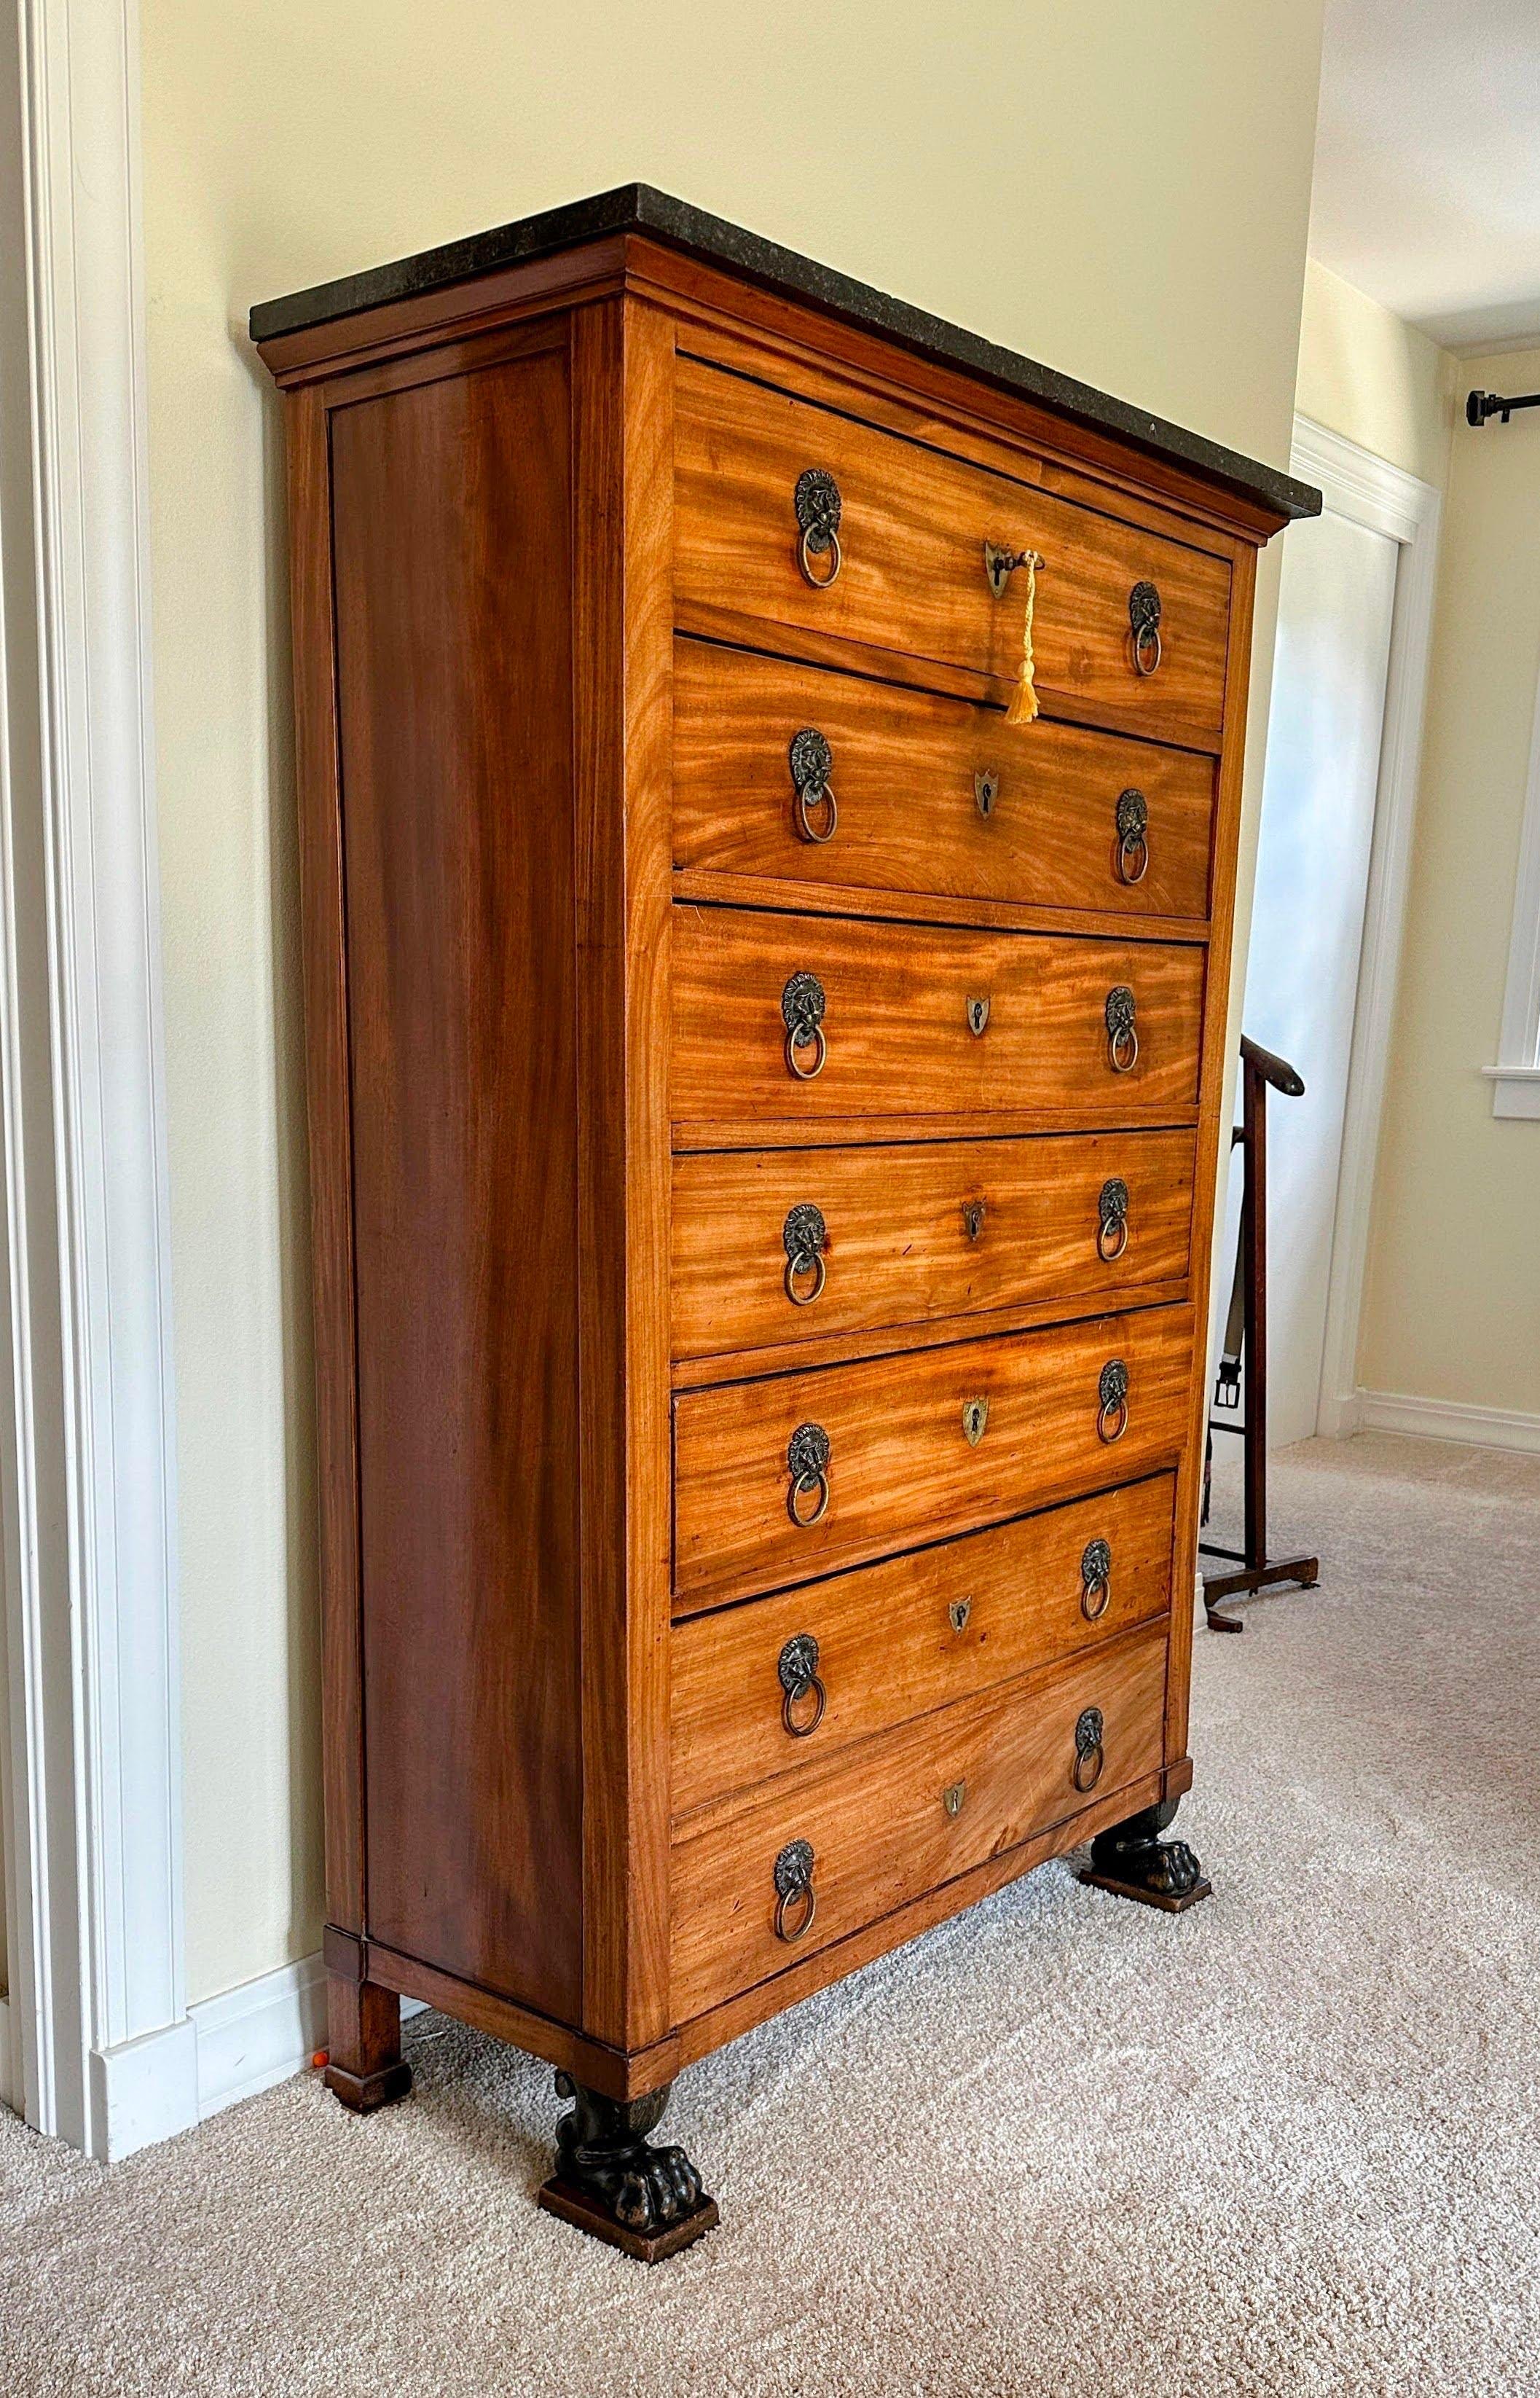 Antique French Semainier Empire Tall Chest of Drawers. A classic early French Empire semainier in walnut, each of the six drawers (double faux drawer on bottom), has a pair of brass lion’s mask door pulls on each drawers, and a fine brass escutcheon